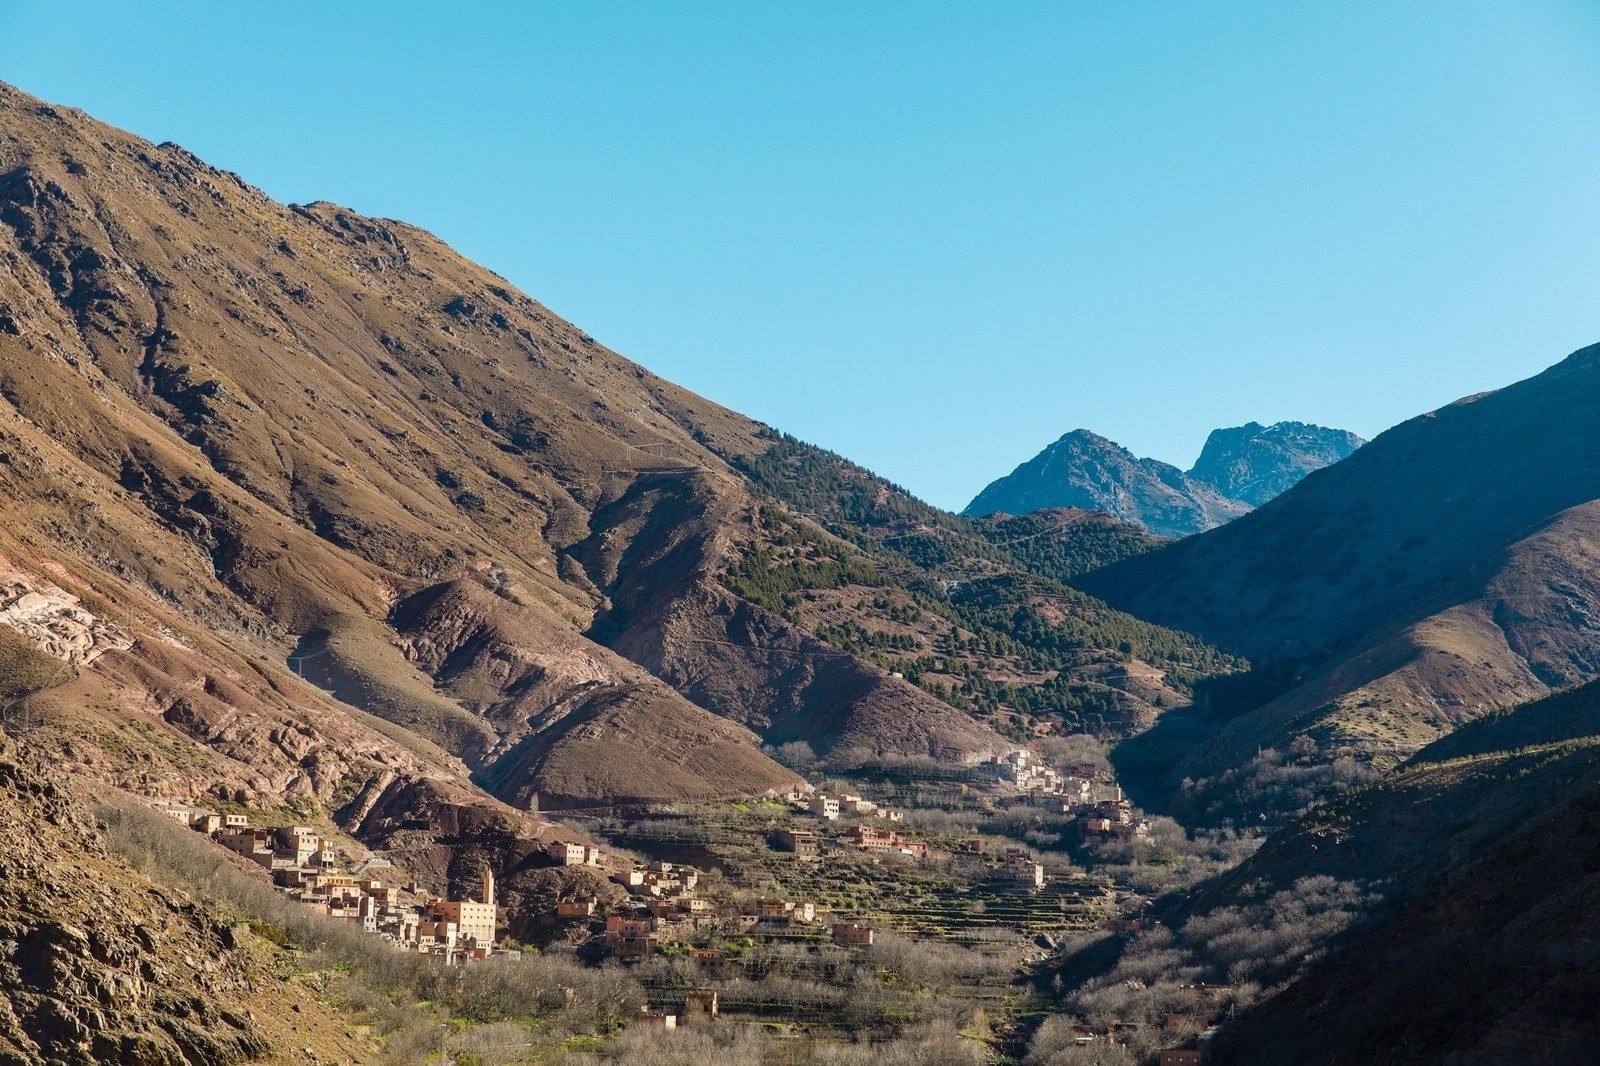 Imlil, a farming village in Morocco that's the gateway to the Atlas Mountains.